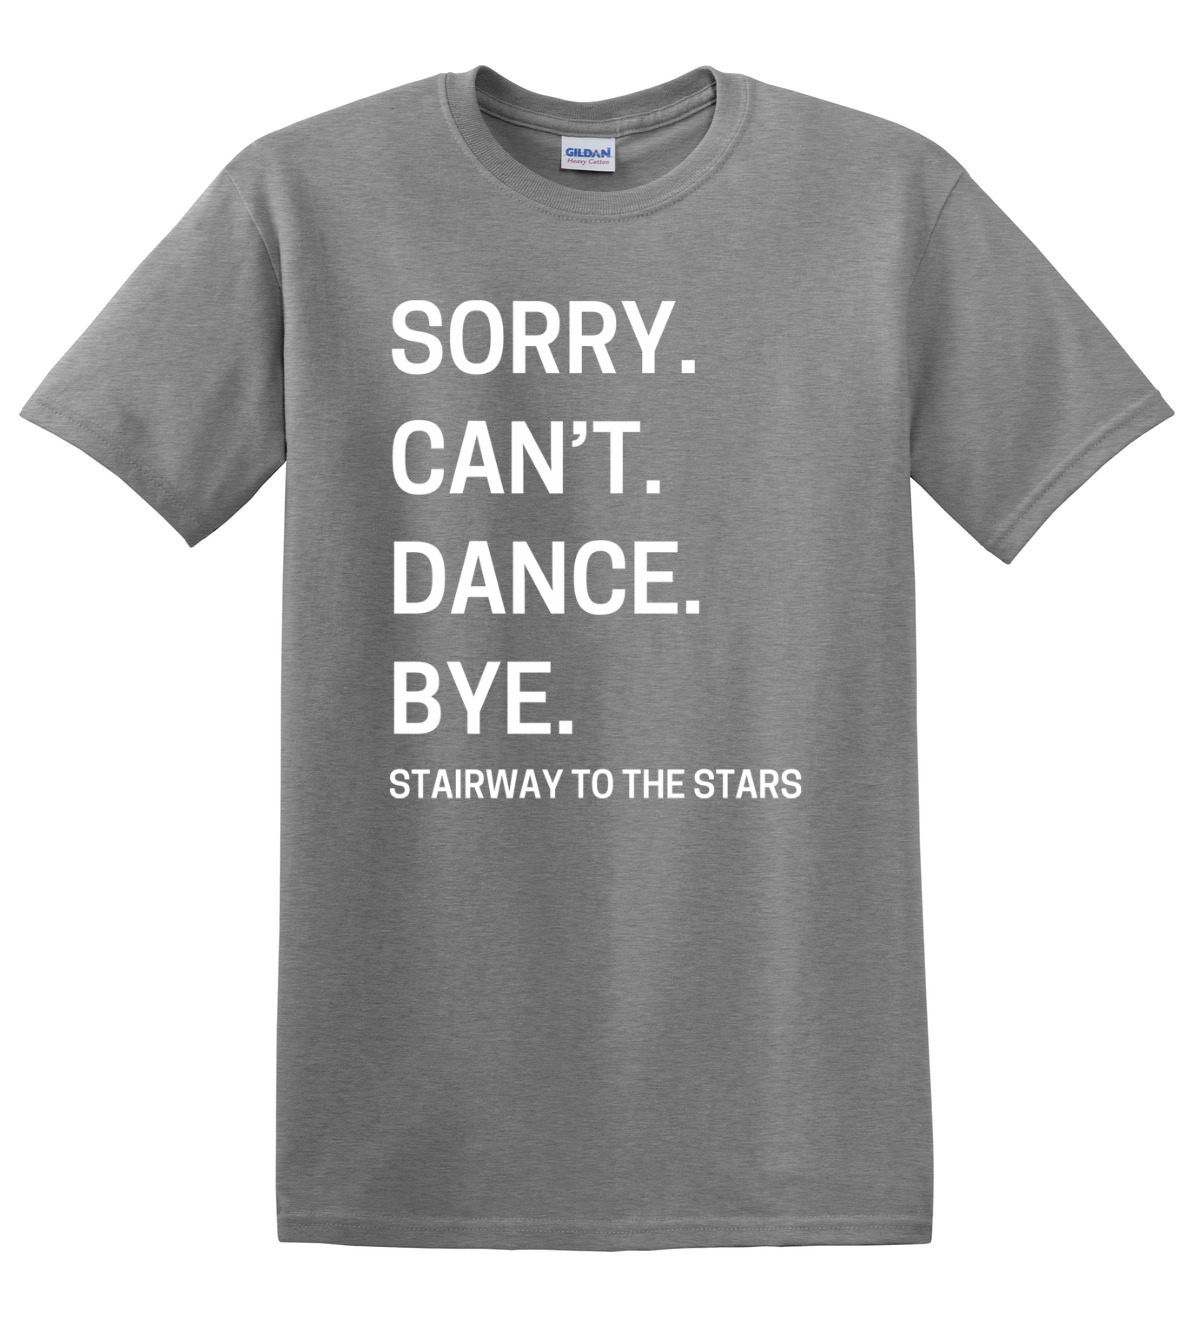 SORRY CAN'T DANCE...TEE - GREY